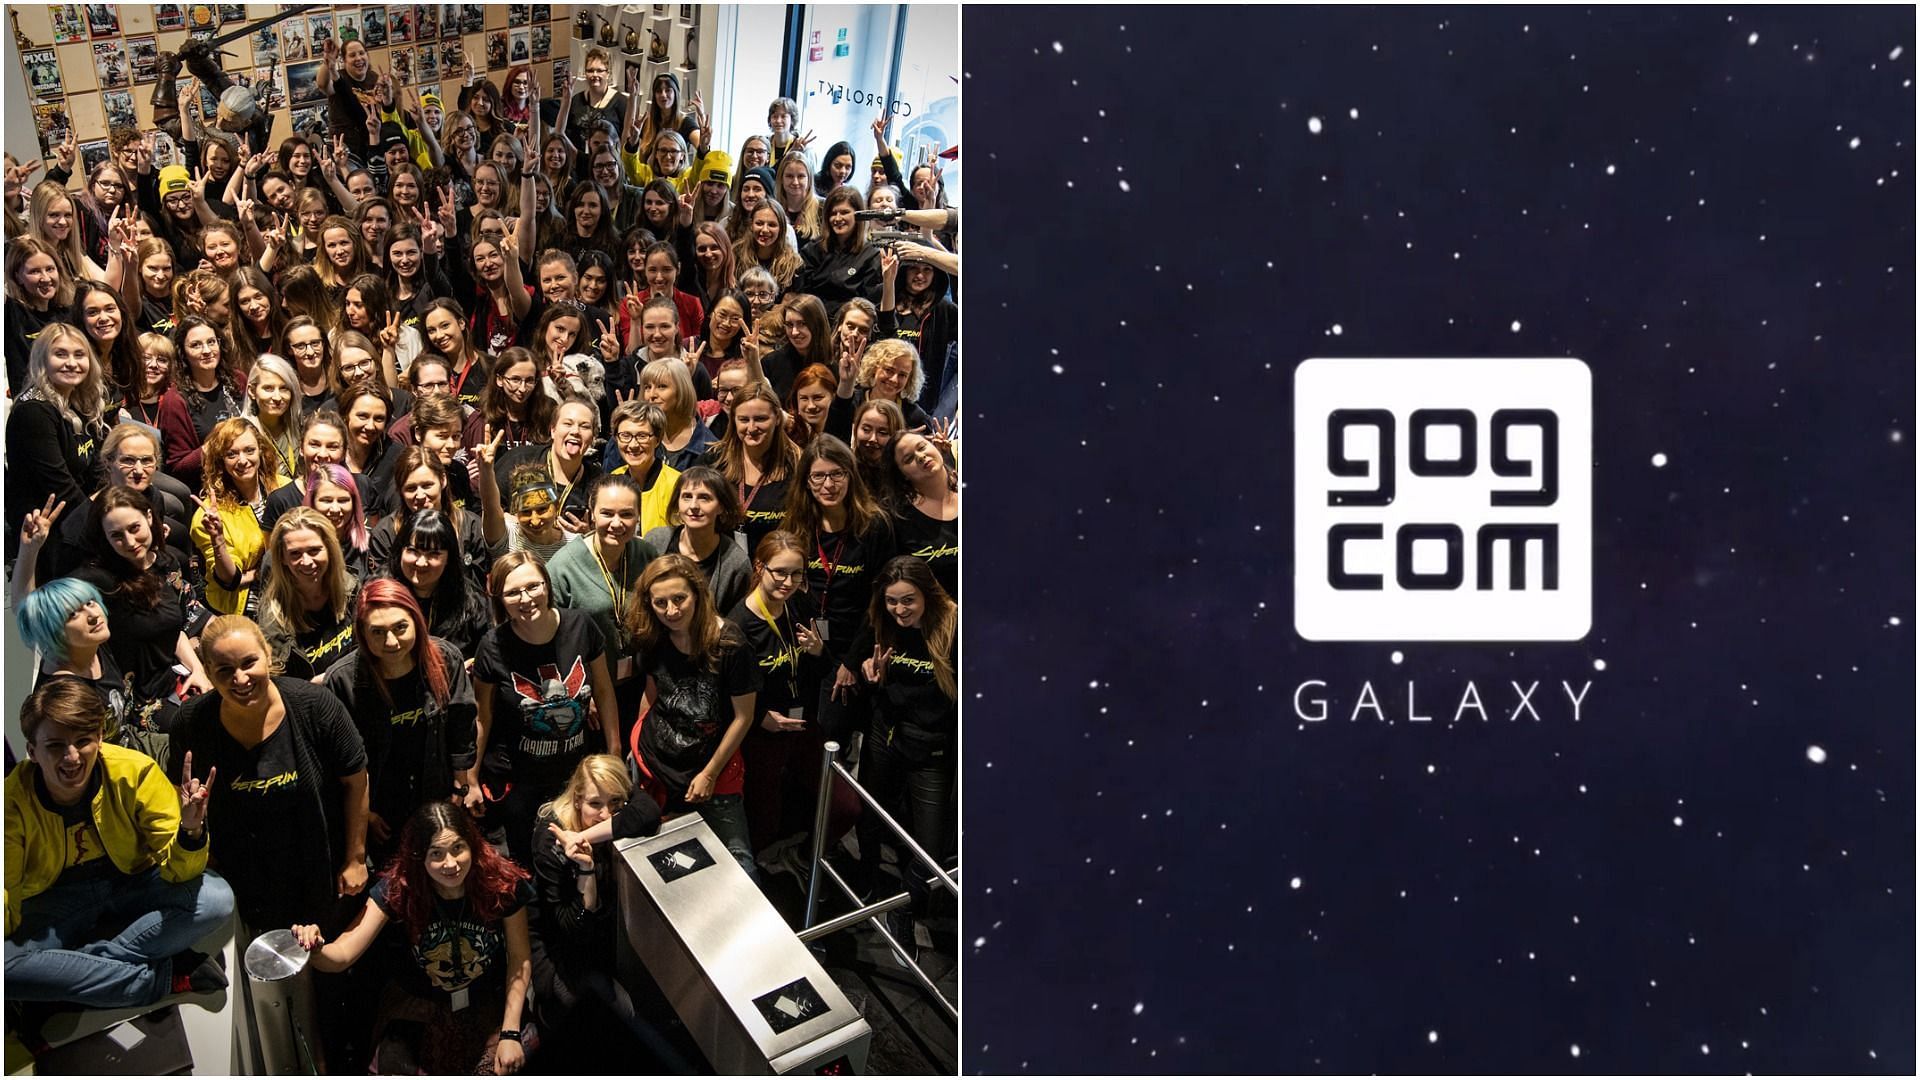 A major move that can empower female employees has been implemented at CDPR subsidiary GOG (Images via CD Projekt Red)